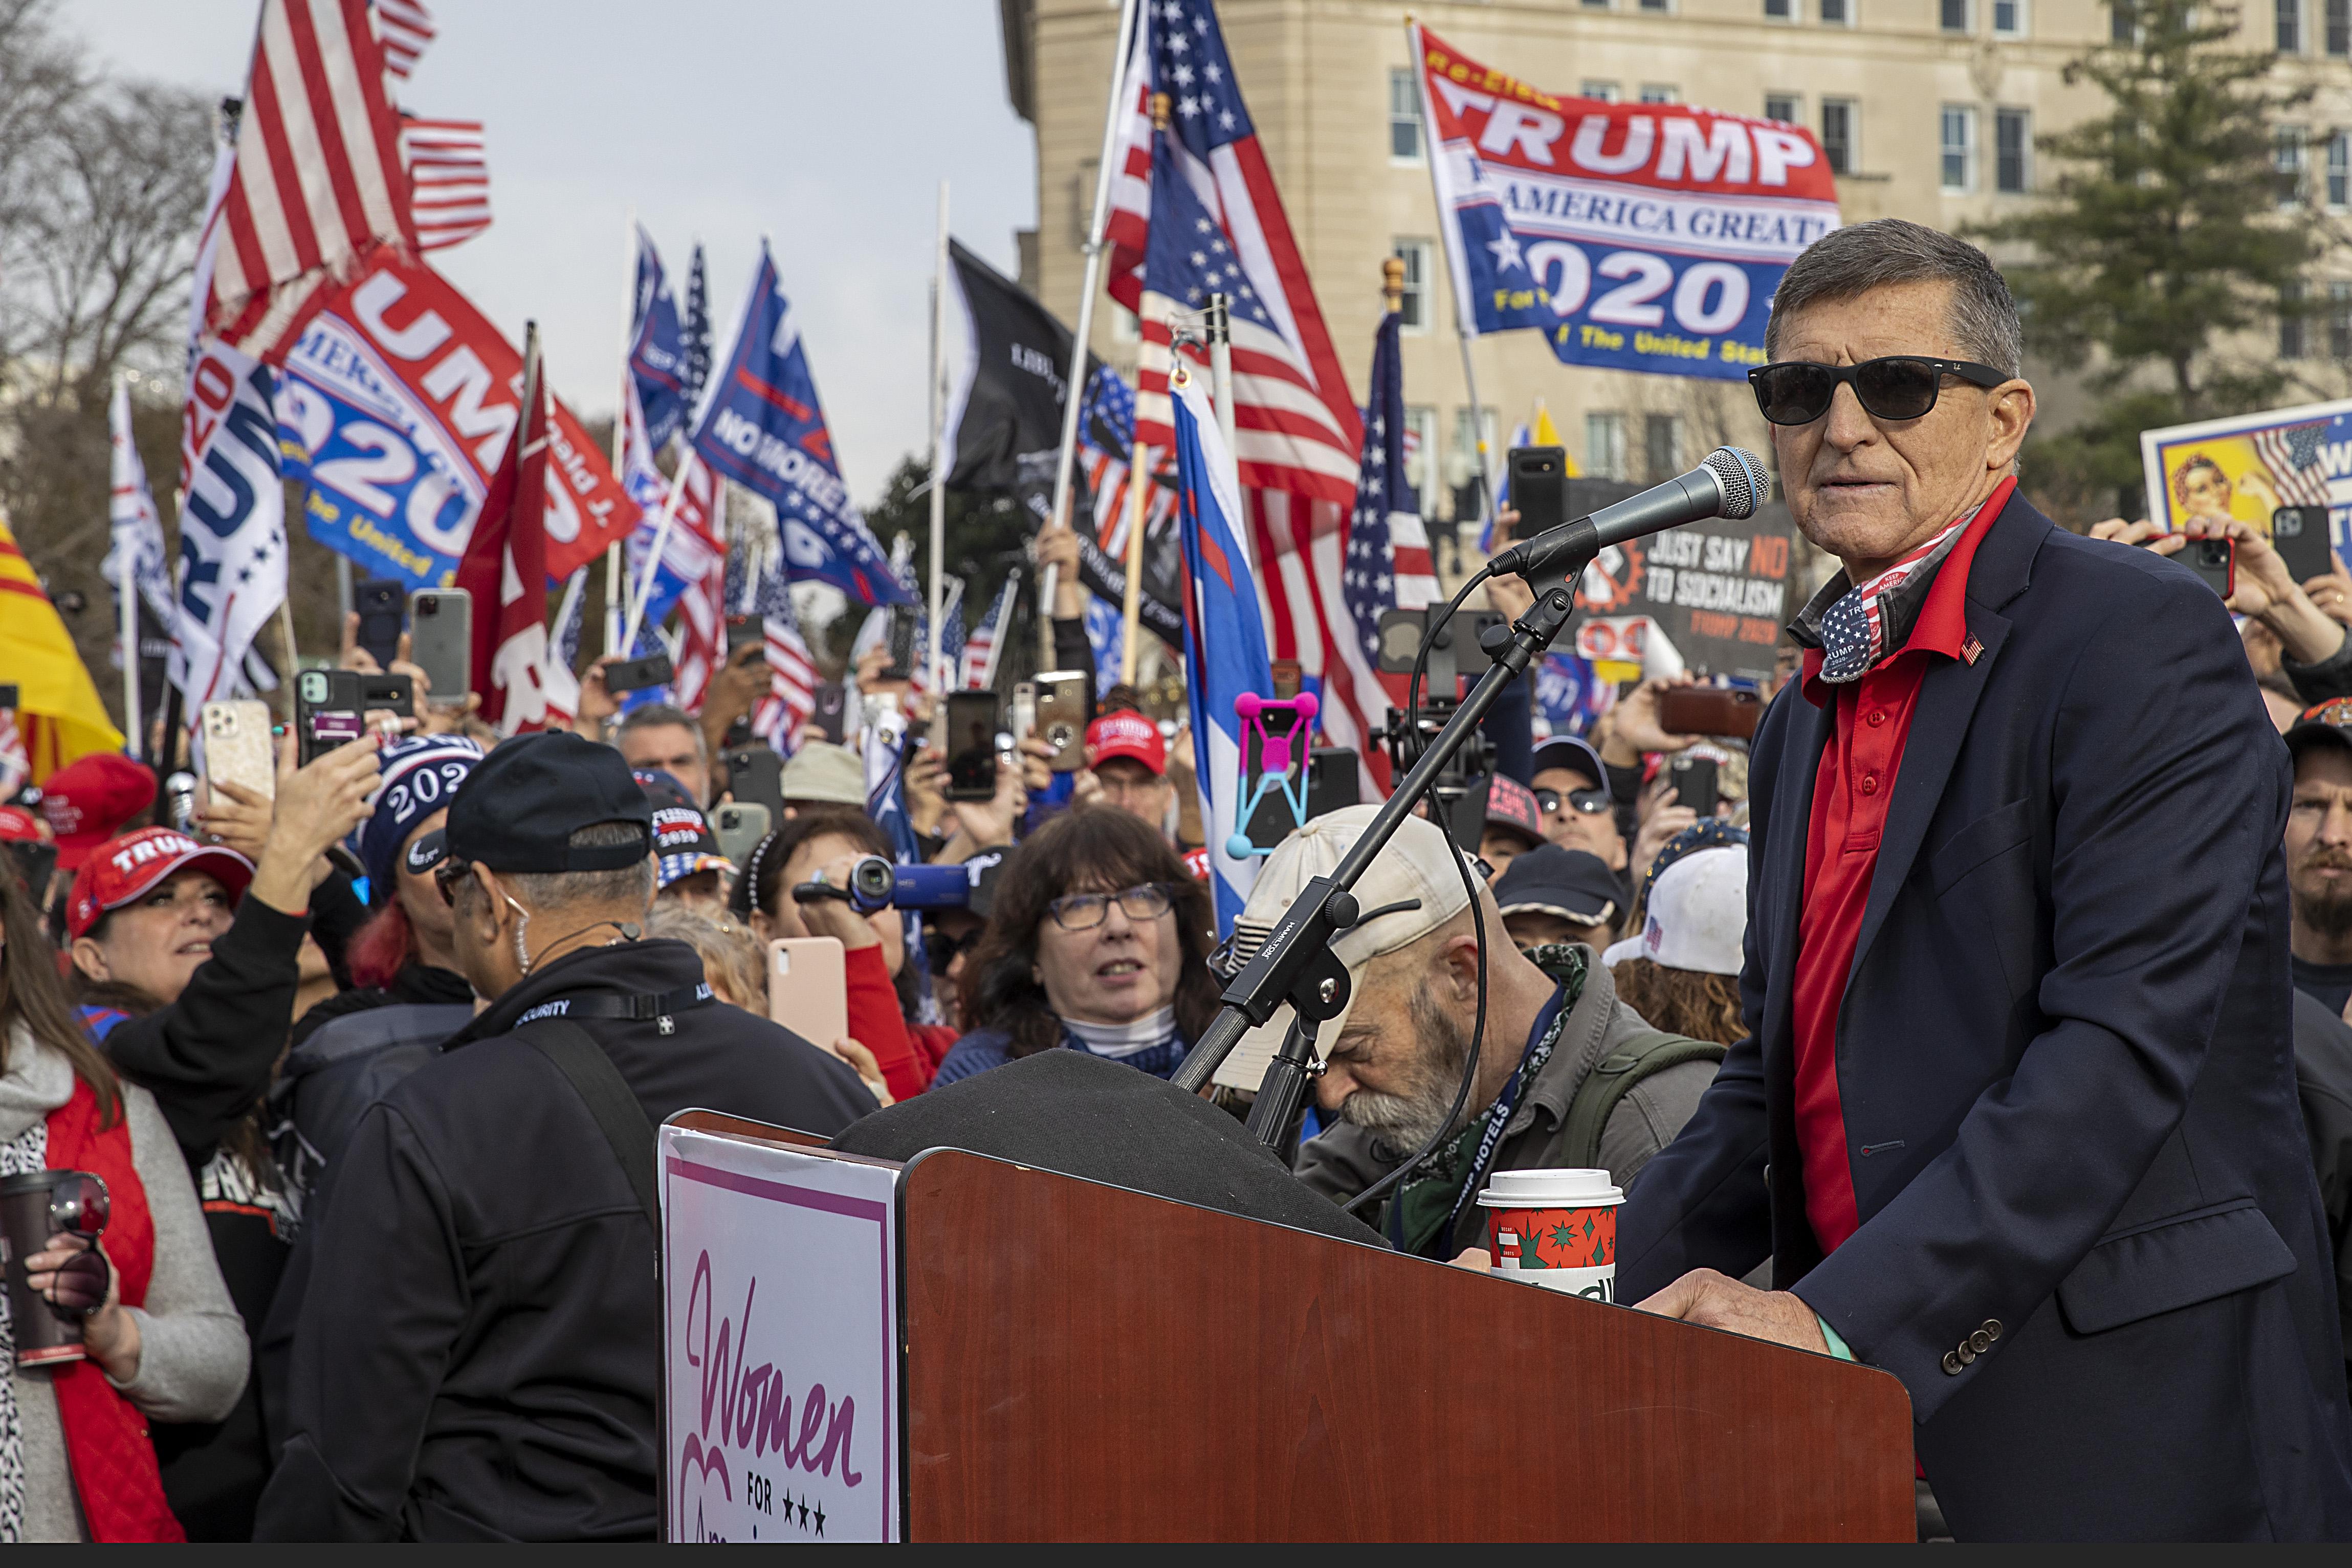 Michael Flynn speaks during a protest of the outcome of the 2020 presidential election outside the Supreme Court on December 12, 2020 in Washington, D.C.